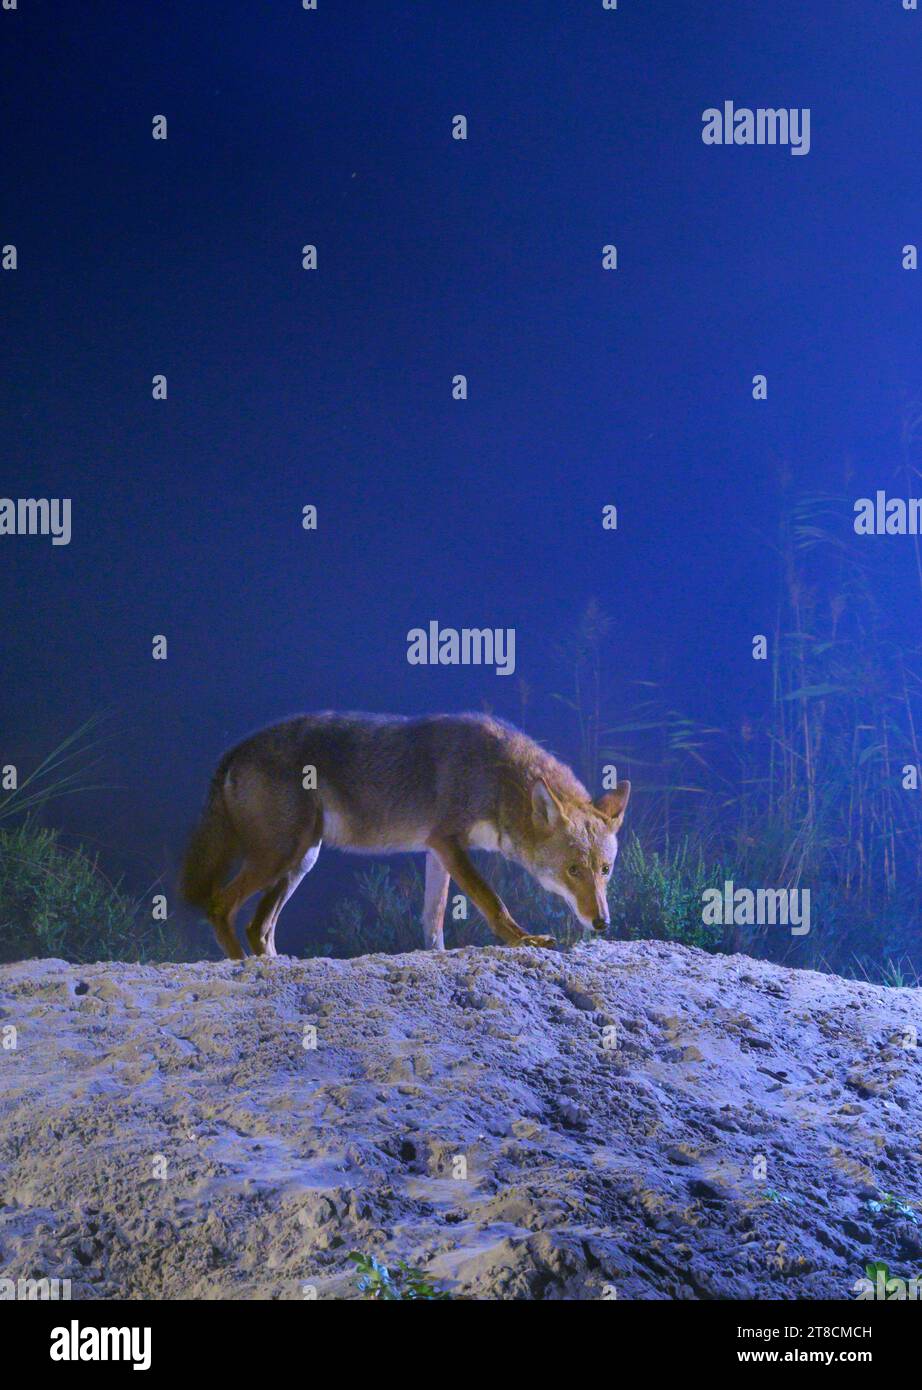 Coyote (Canis latrans) on sand dune at foggy night, Galveston, Texas, USA. This coyote population is believed to have genes of red wolf (Canis rufus). Stock Photo